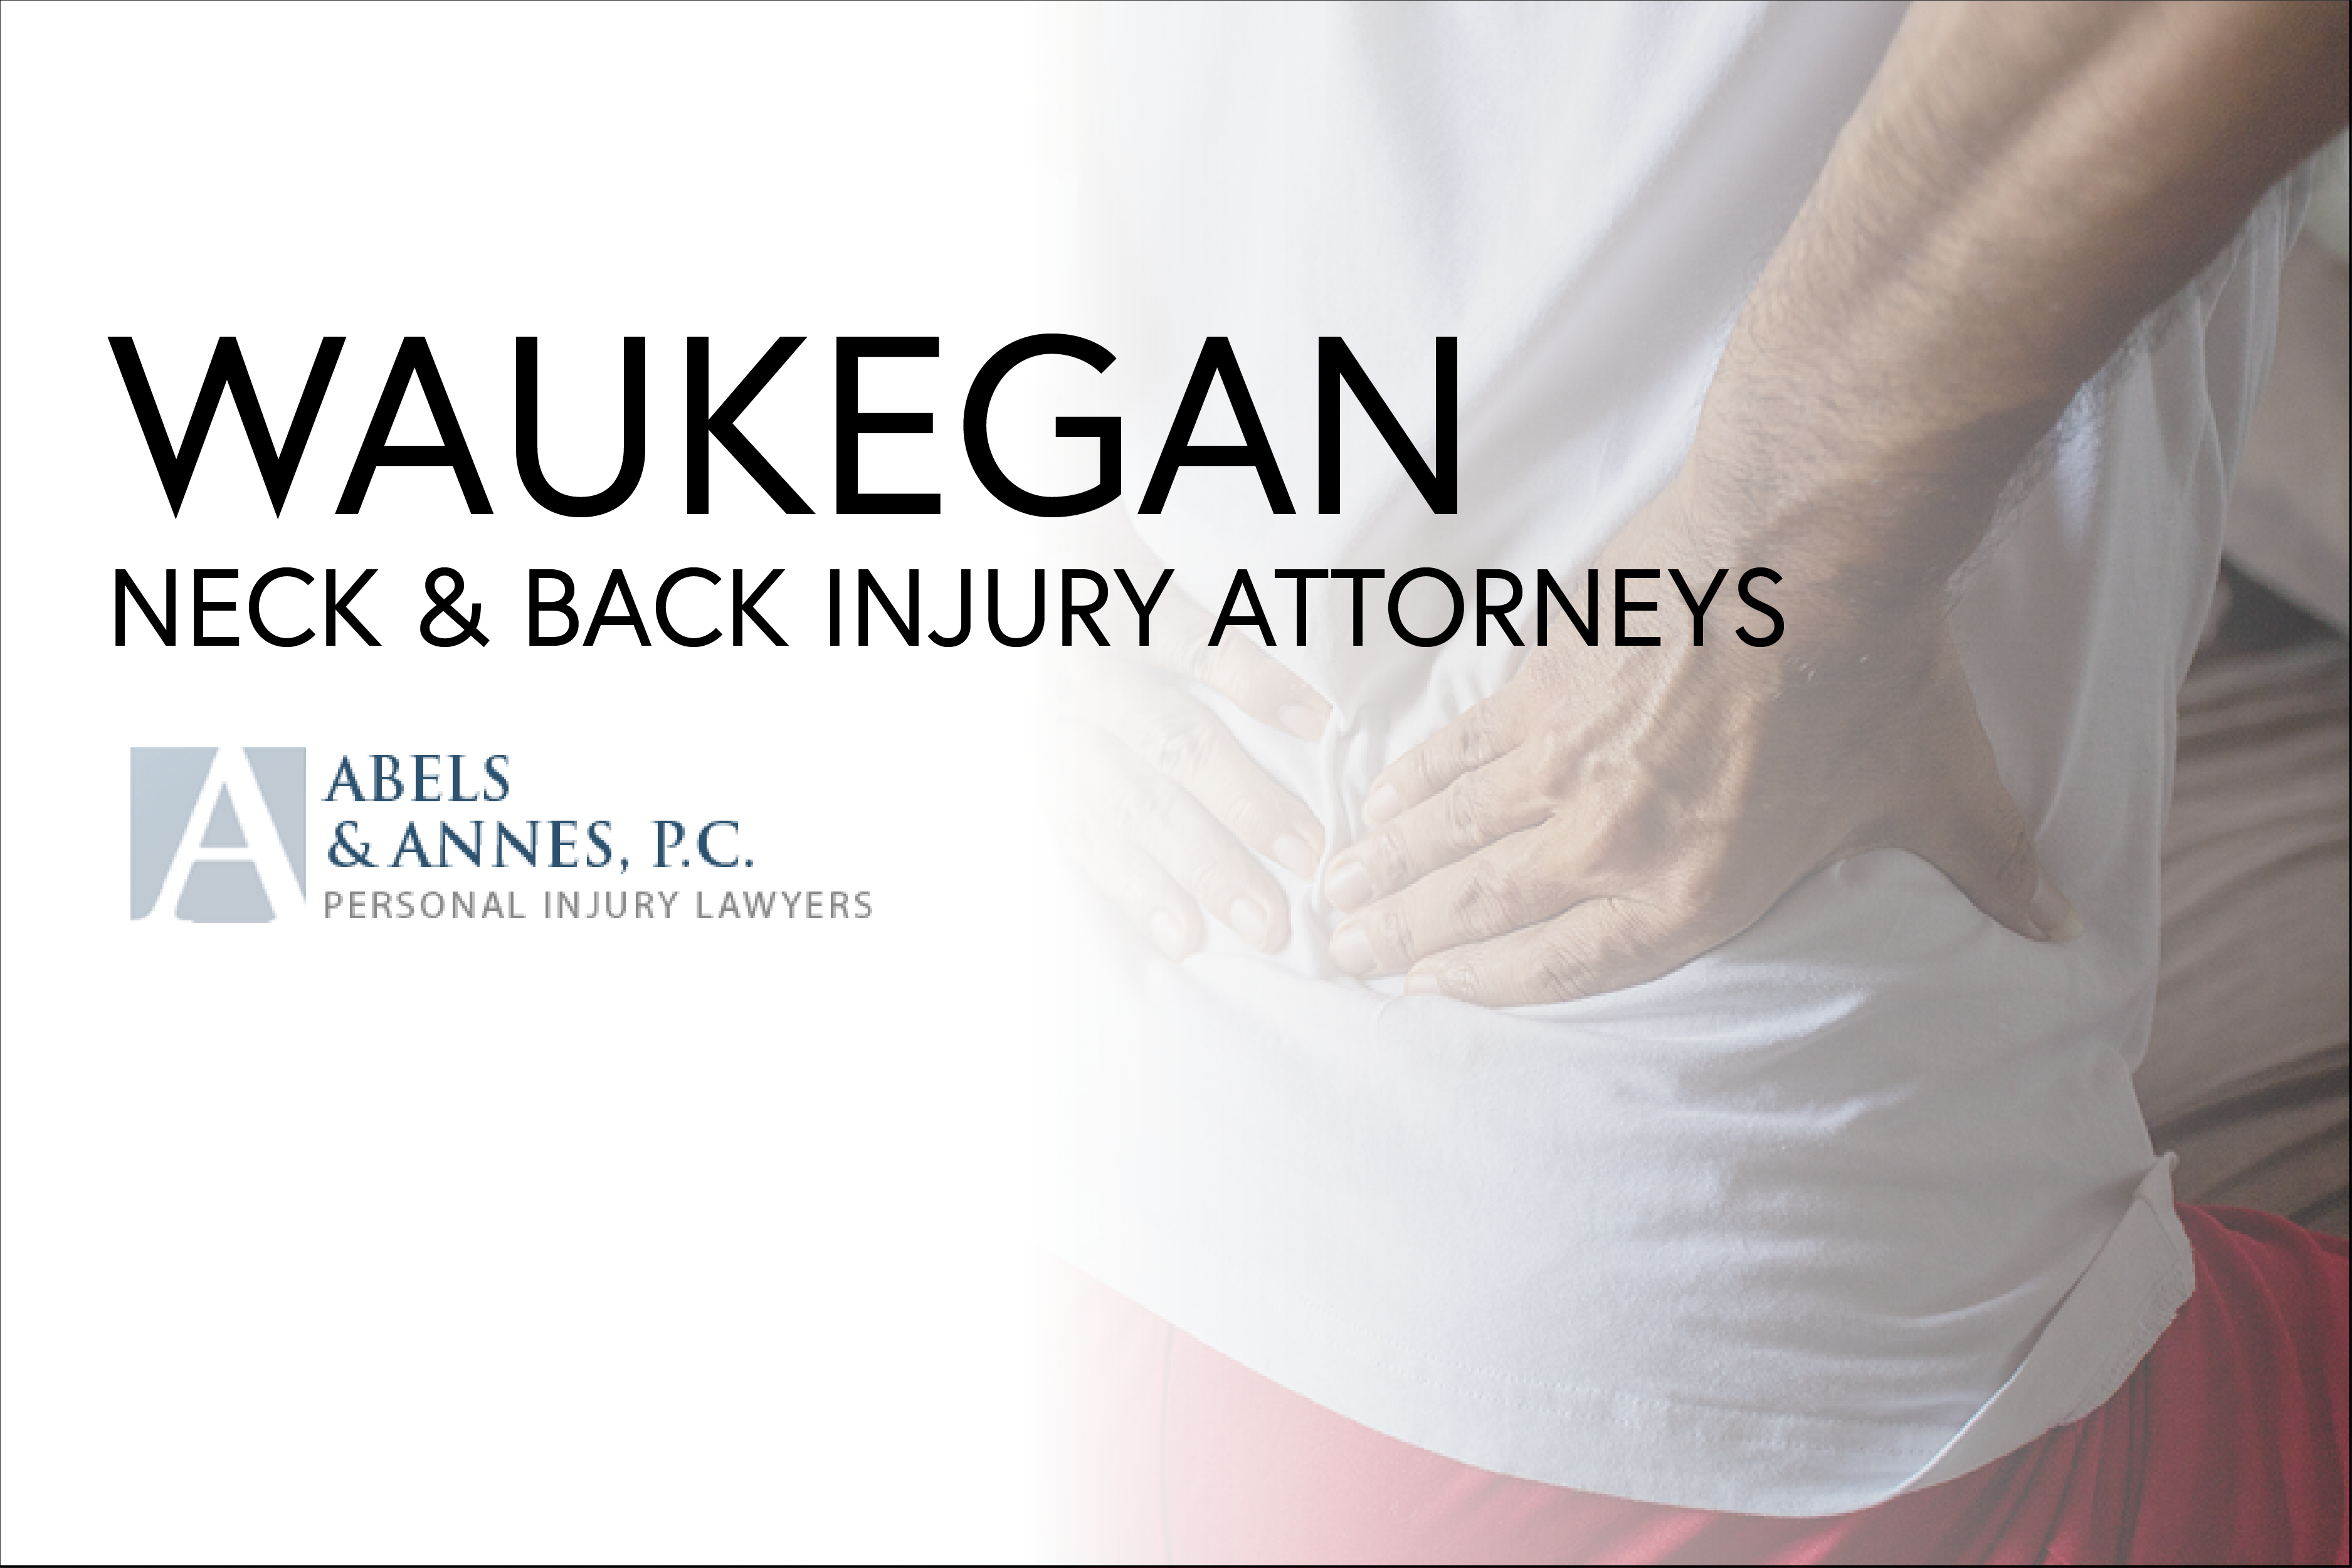 Waukegan Neck and Back Injury Attorneys - Abels and Annes Personal Injury Lawyers